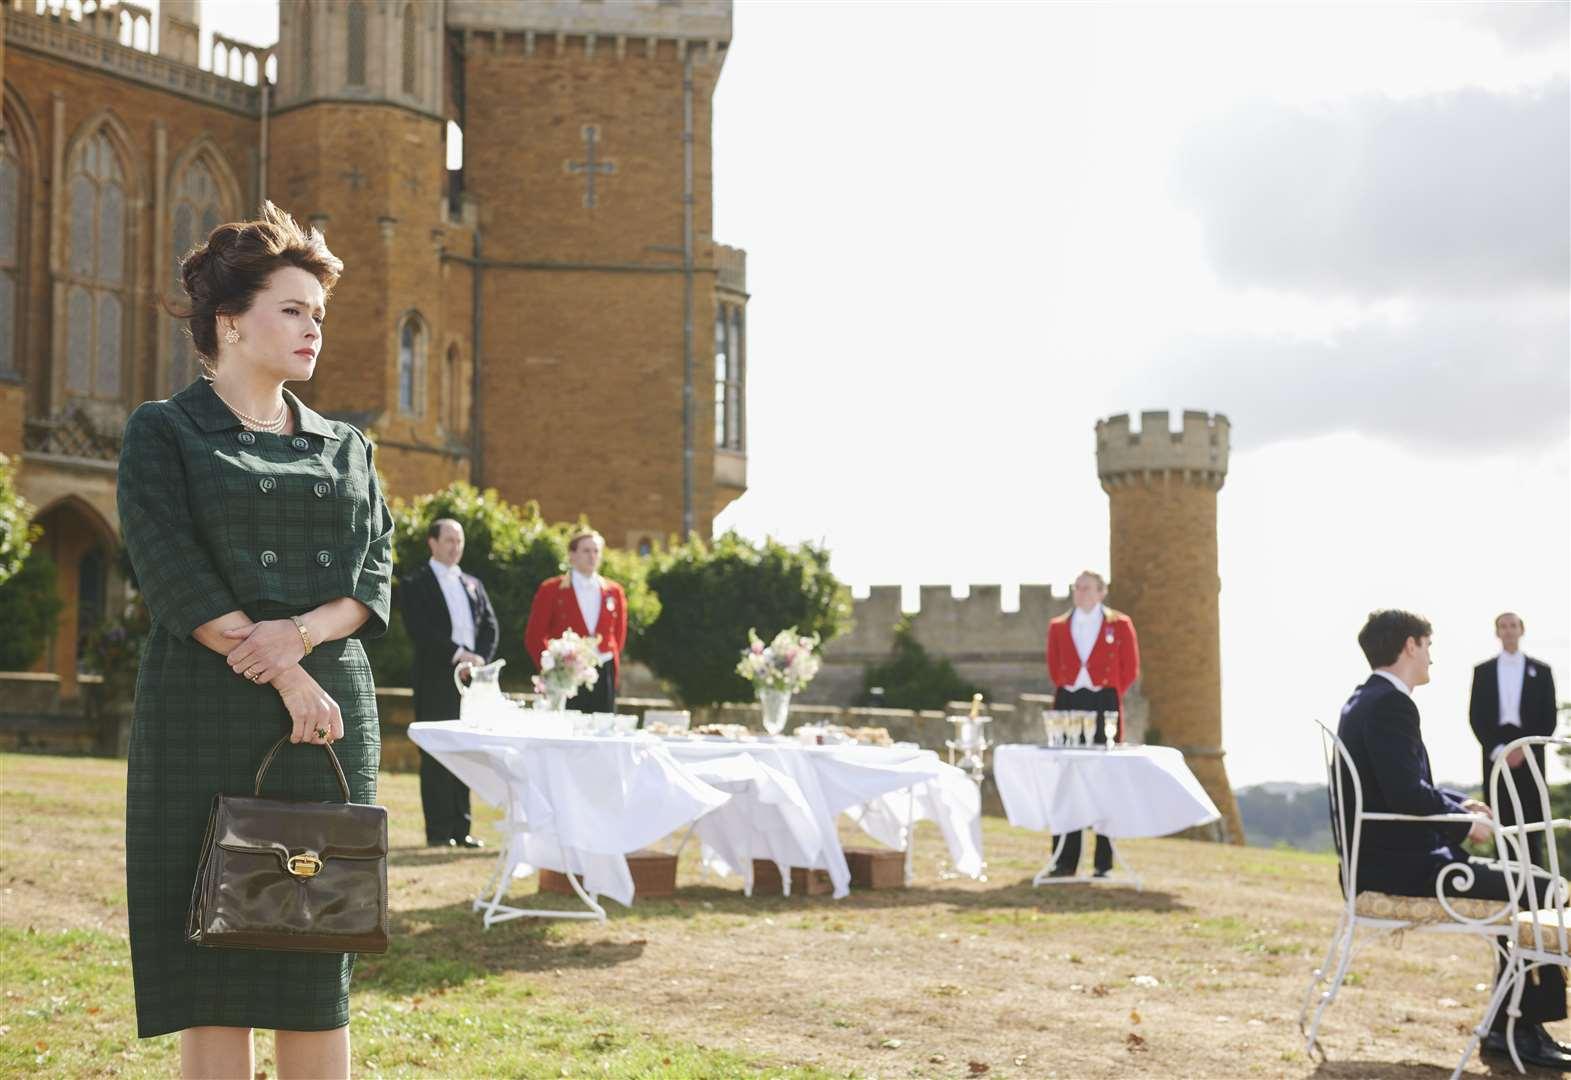 You Can Now Stay In The Castle From "The Crown" On Airbnb With Royal High Teas And Grand Dinners